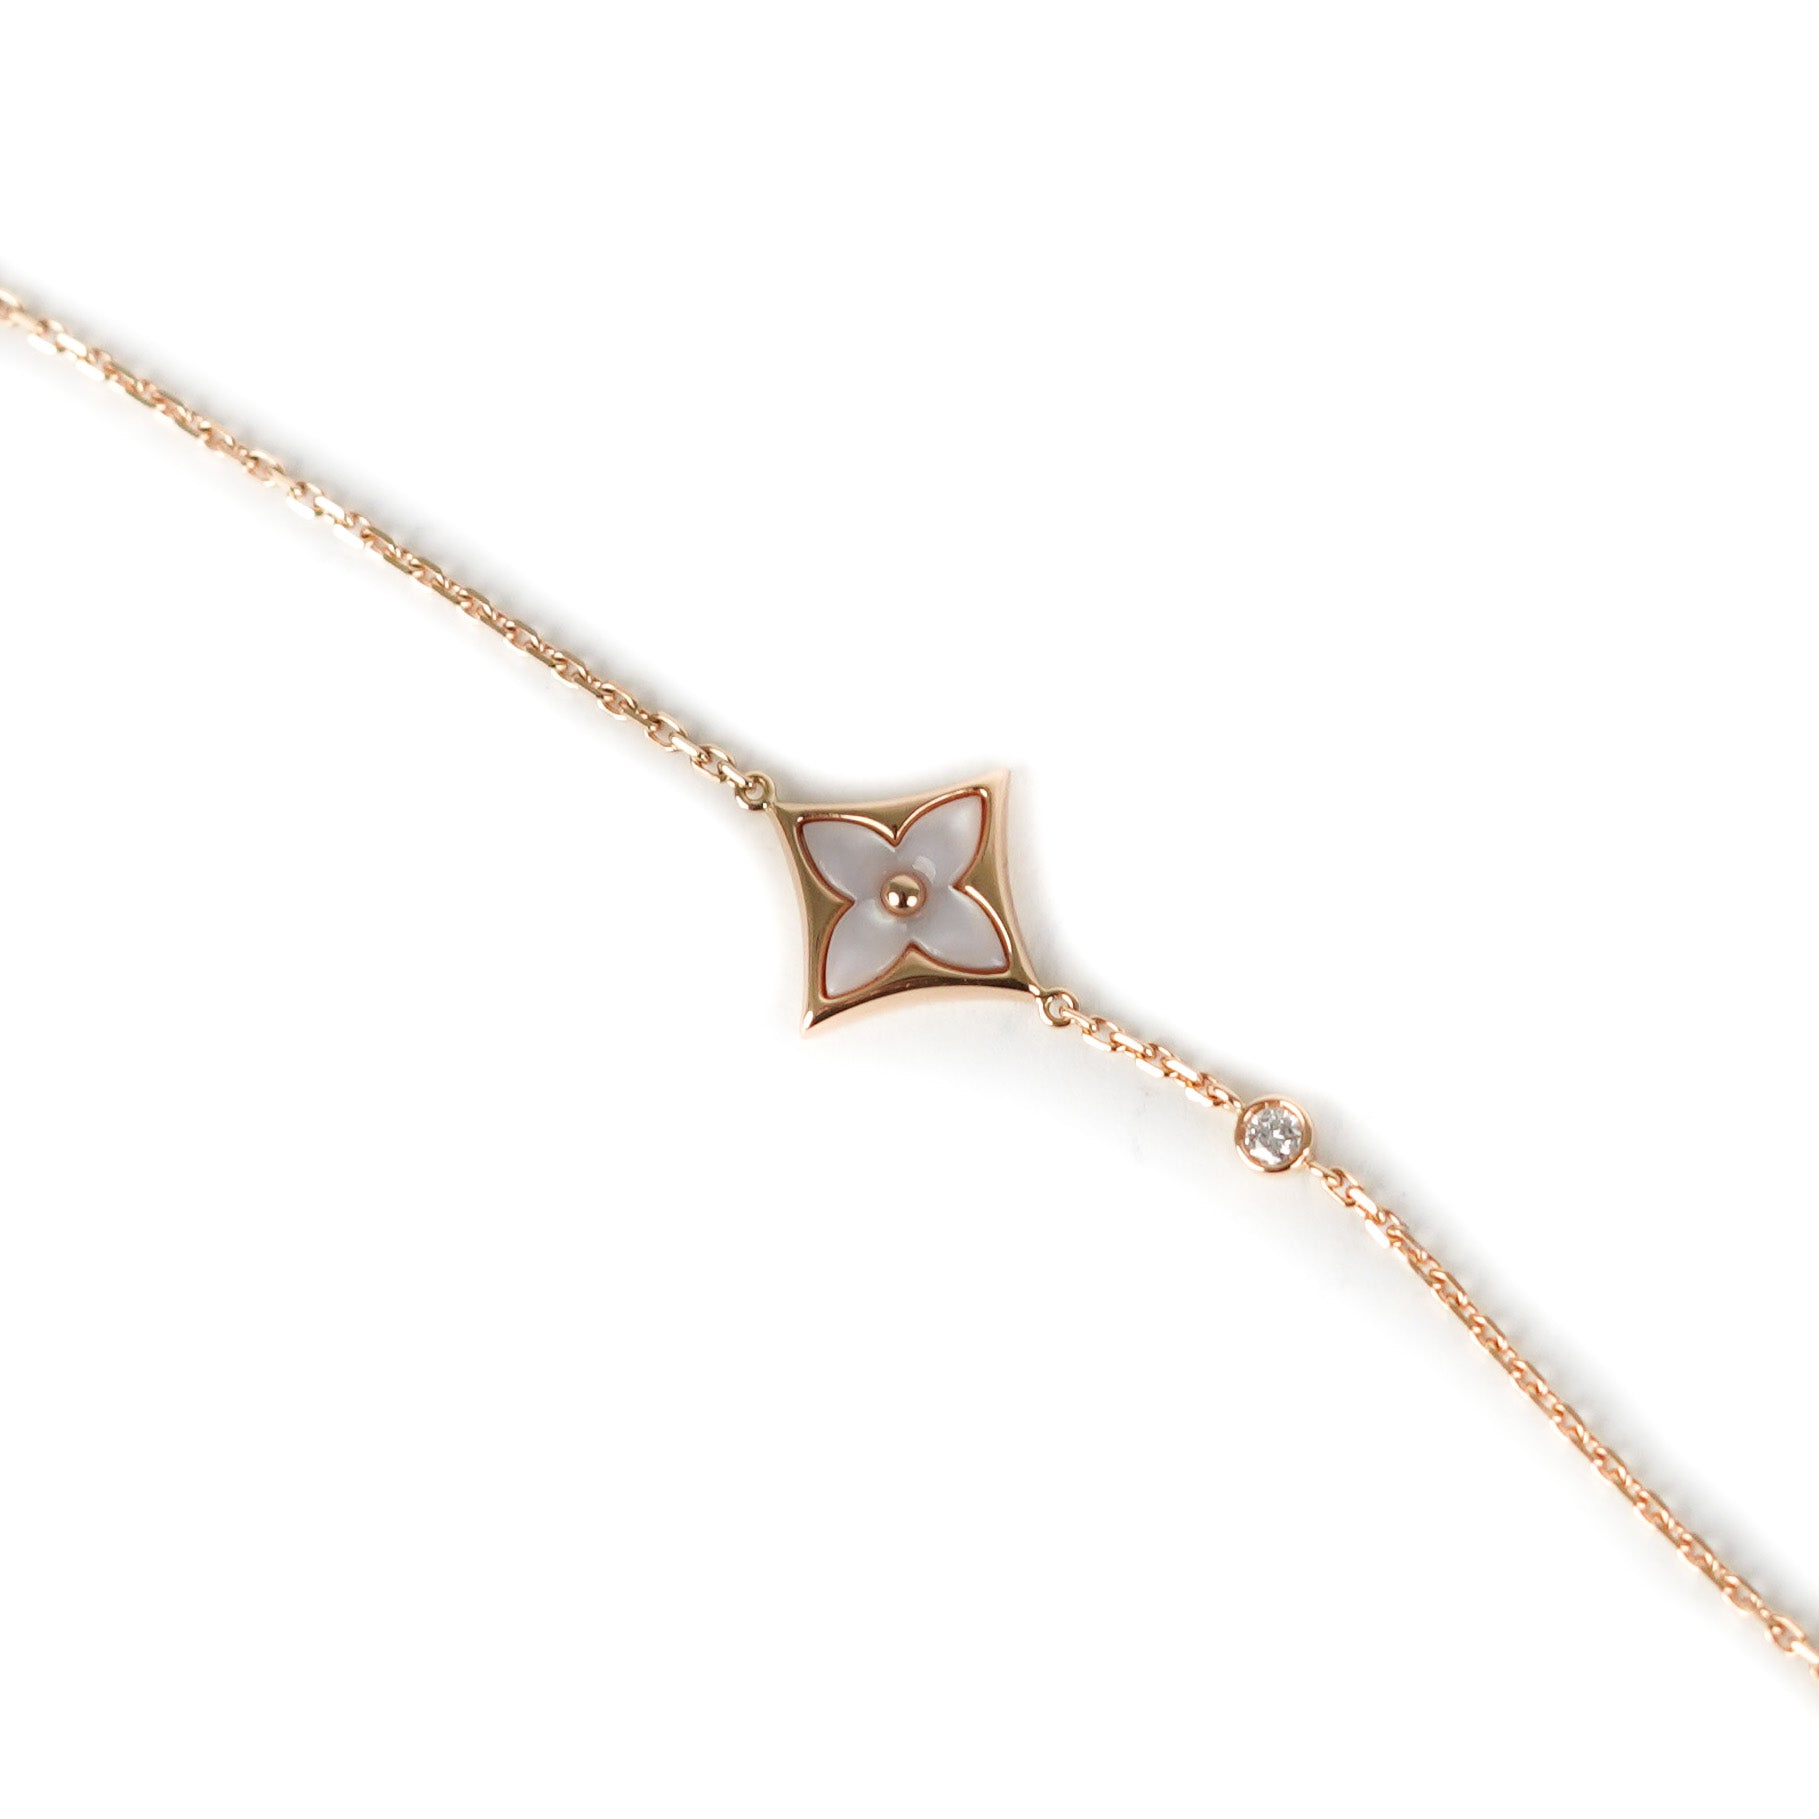 Louis Vuitton Idylle Blossom Necklace, Pink Gold and Diamonds. Size NSA